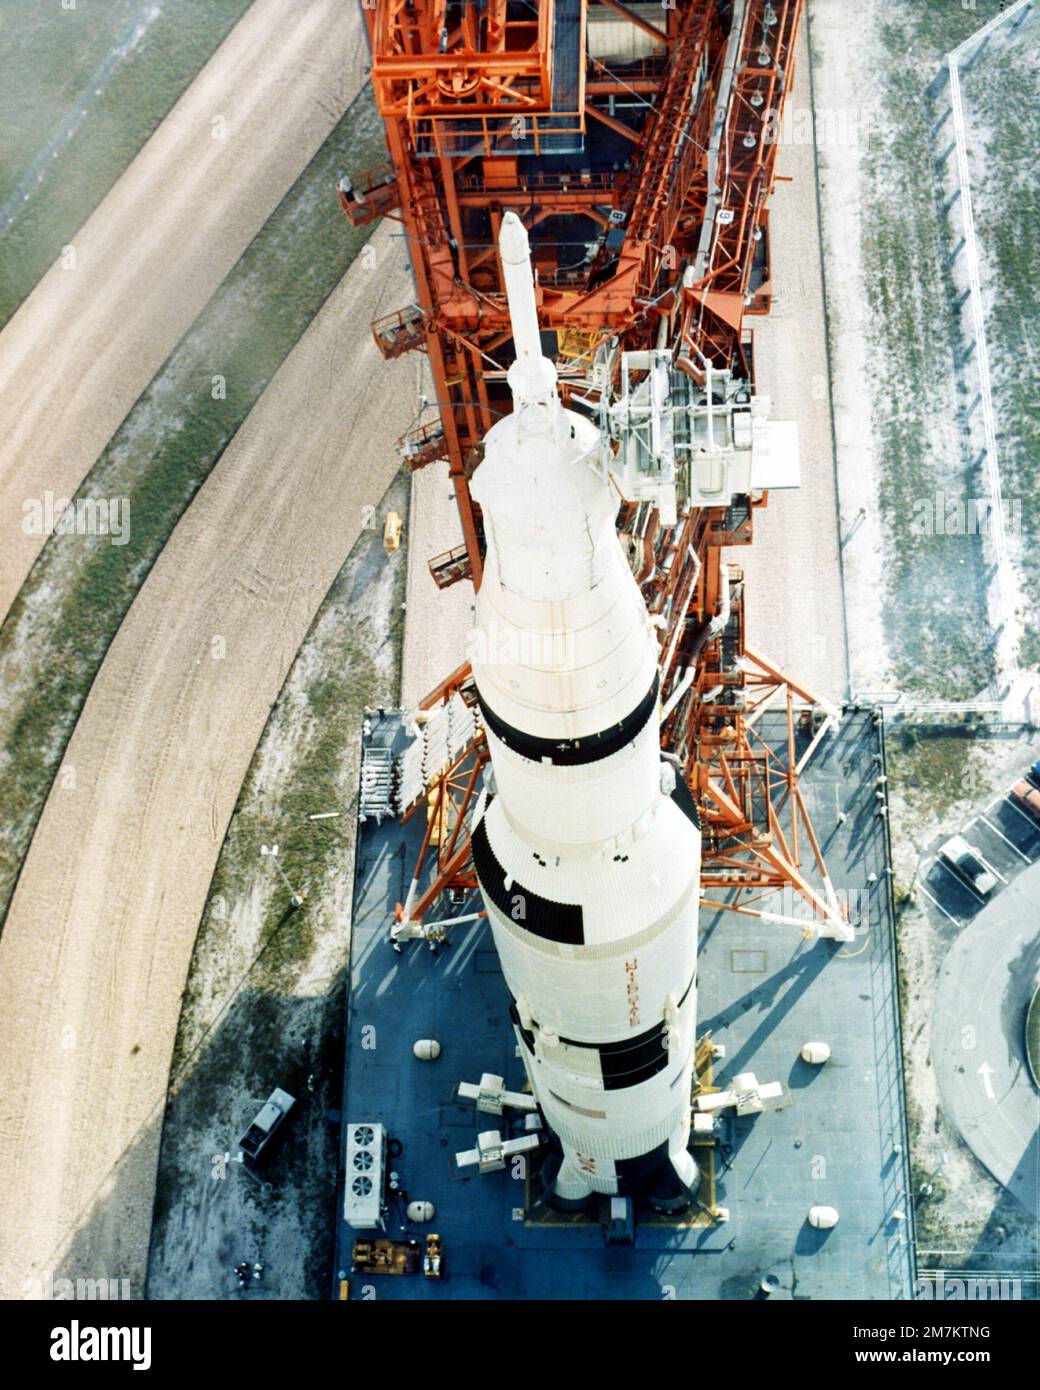 A view of the 363-foot high Saturn V launch vehicle that will carry Apollo 8 astronauts Frank Borman, James Lovell and William Anders into space. The launch vehicle is being moved from the Vehicle Assembly Building to Launch Pad A, Complex 39. Apollo 8, scheduled for launch in December, will be the first manned Saturn V flight. Base: Kennedy Space Center State: Florida (FL) Country: United States Of America (USA) Stock Photo